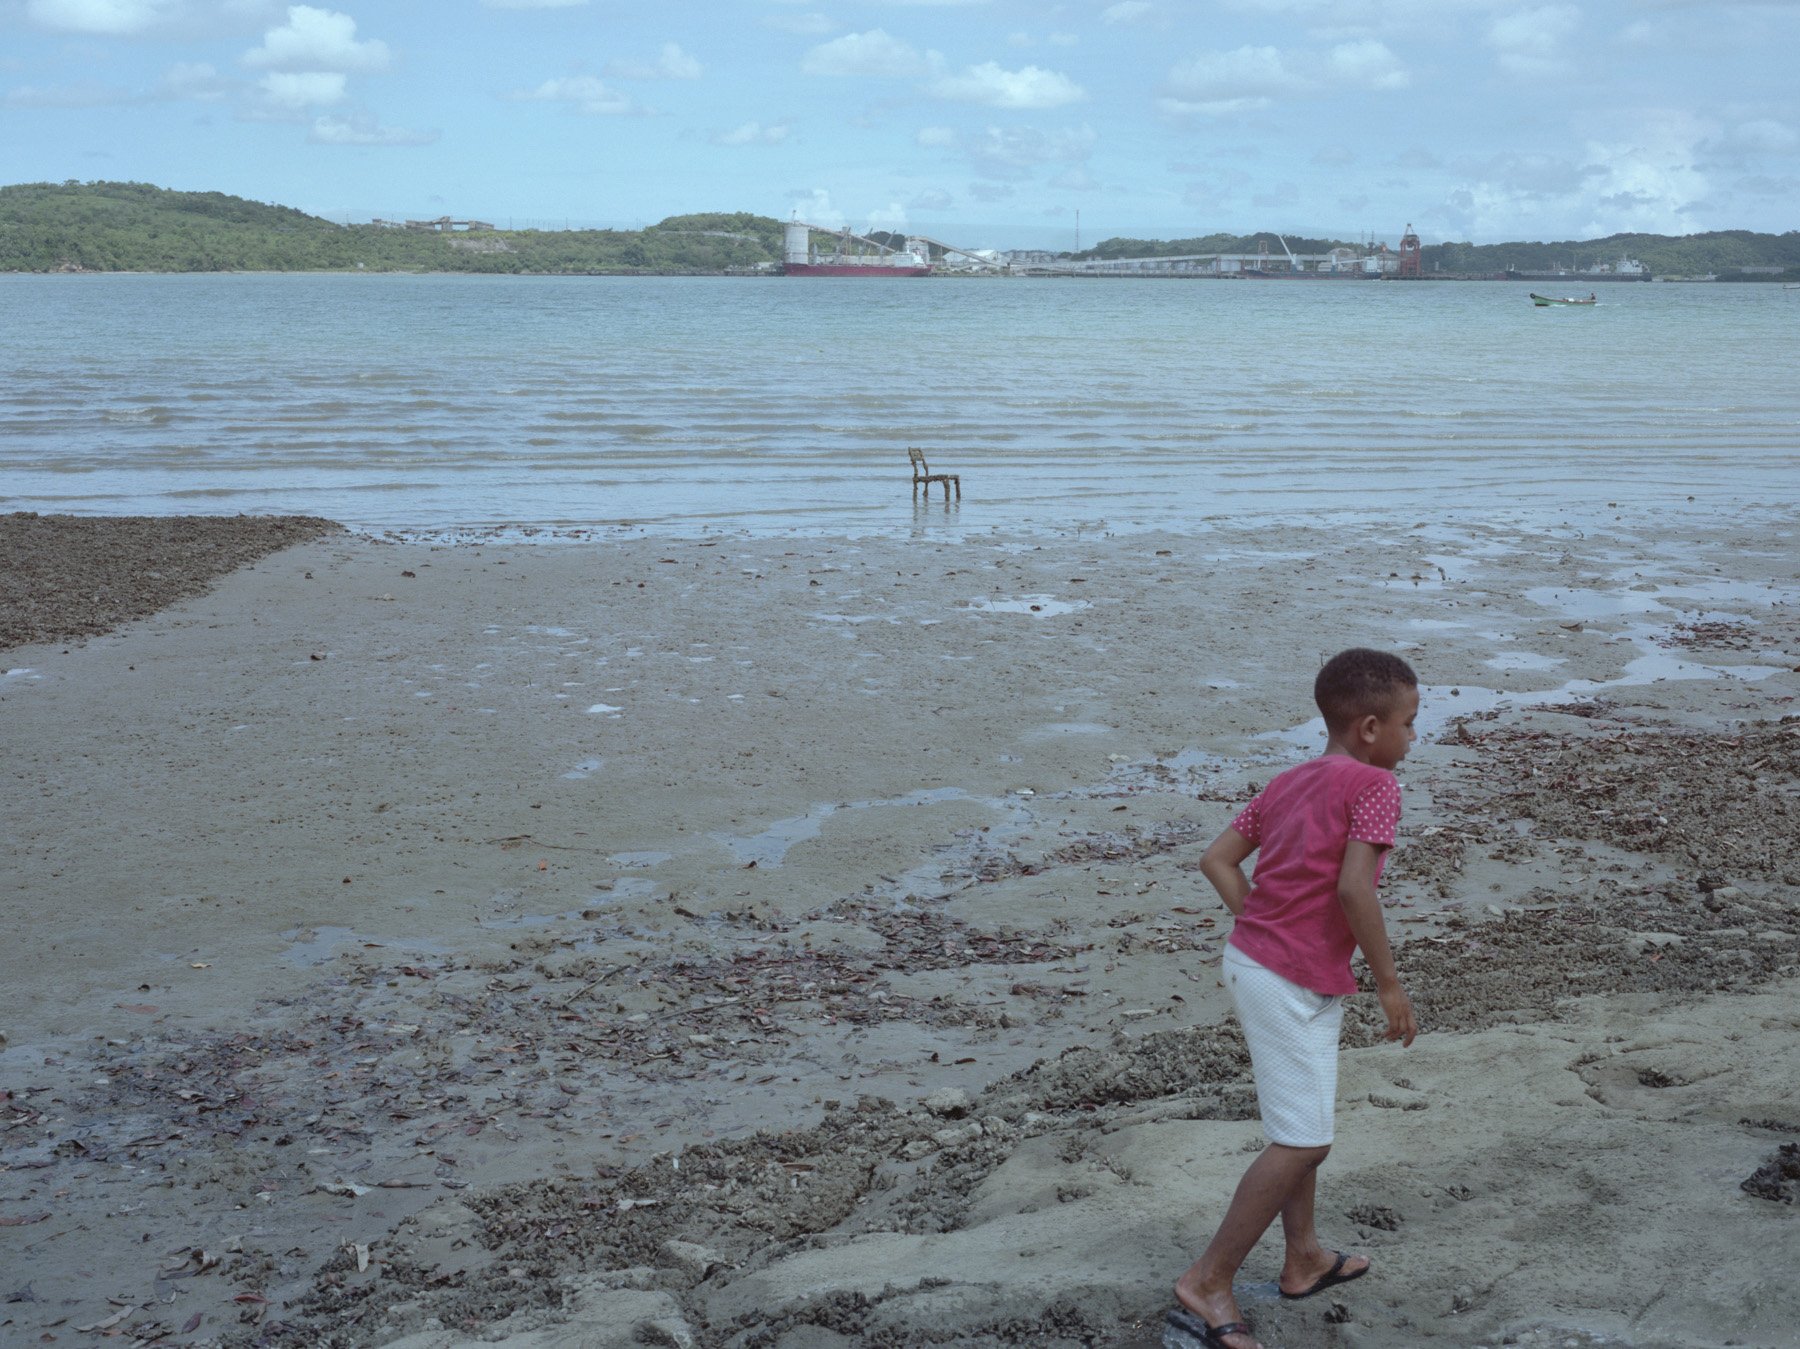  Ilha da Maré, Bahia, 2020. A child from Ilha da Maré plays while searching for seafood. The Ilha da Mare is the home of several Quilombola’s communities that live of fishing. The waters where they fish are polluted with petrochemical residues and ot